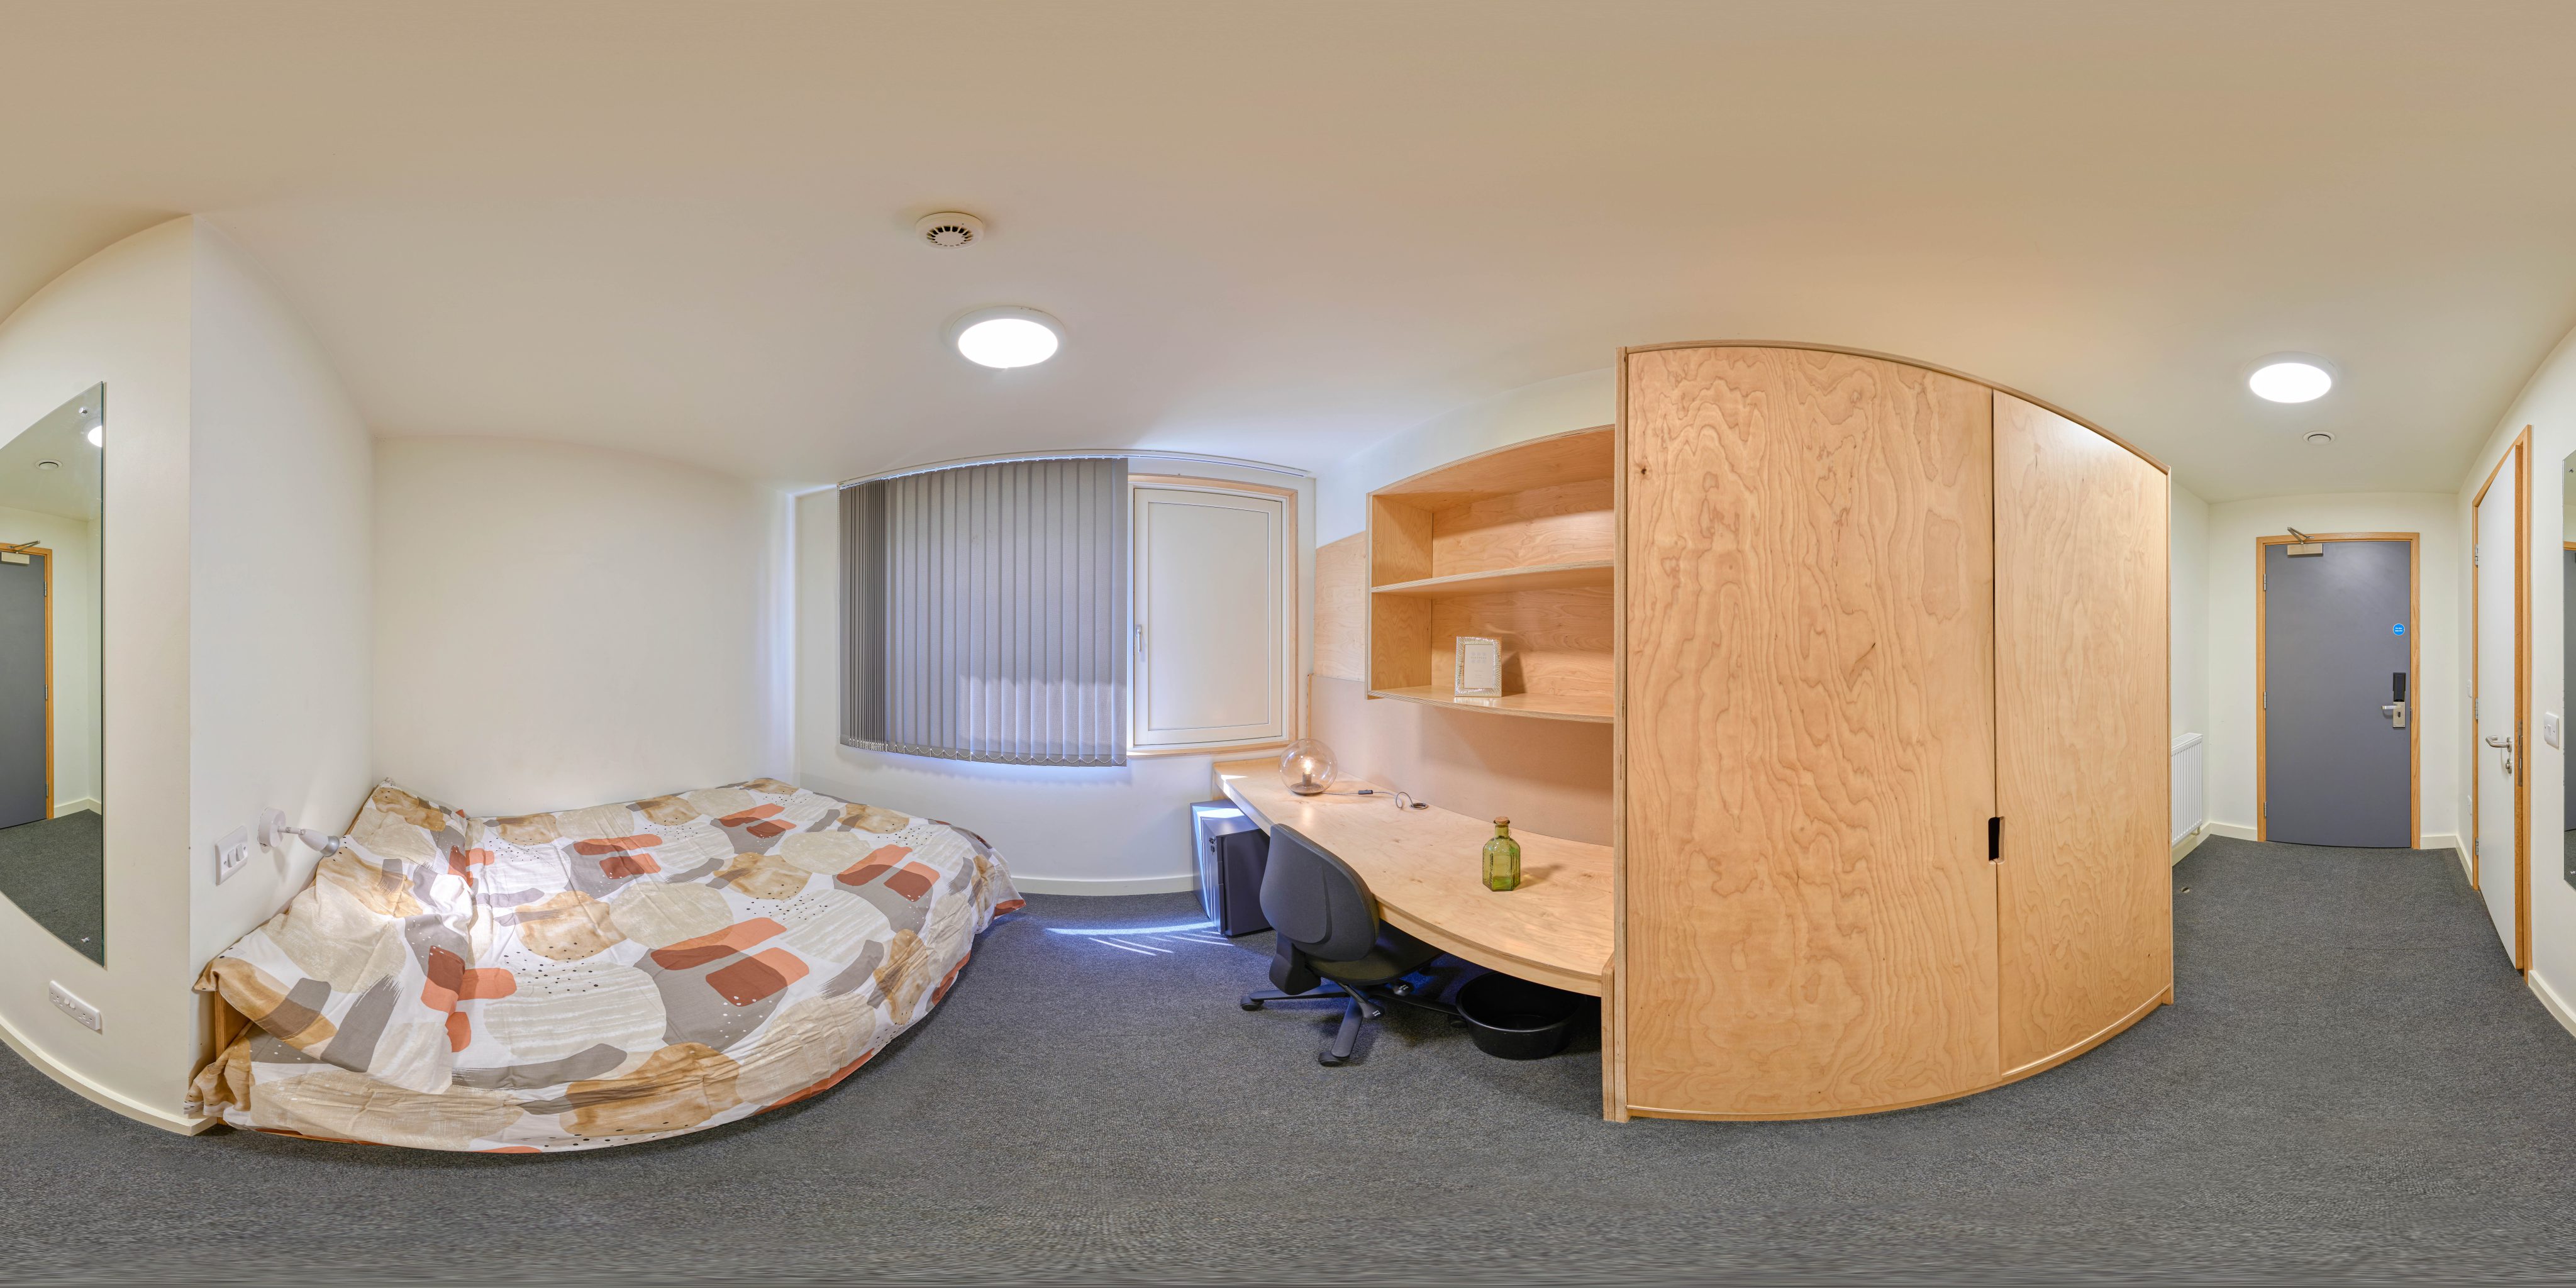 360 degree tour of a bedroom in Raymont Hall with bed, desk and wardrobe